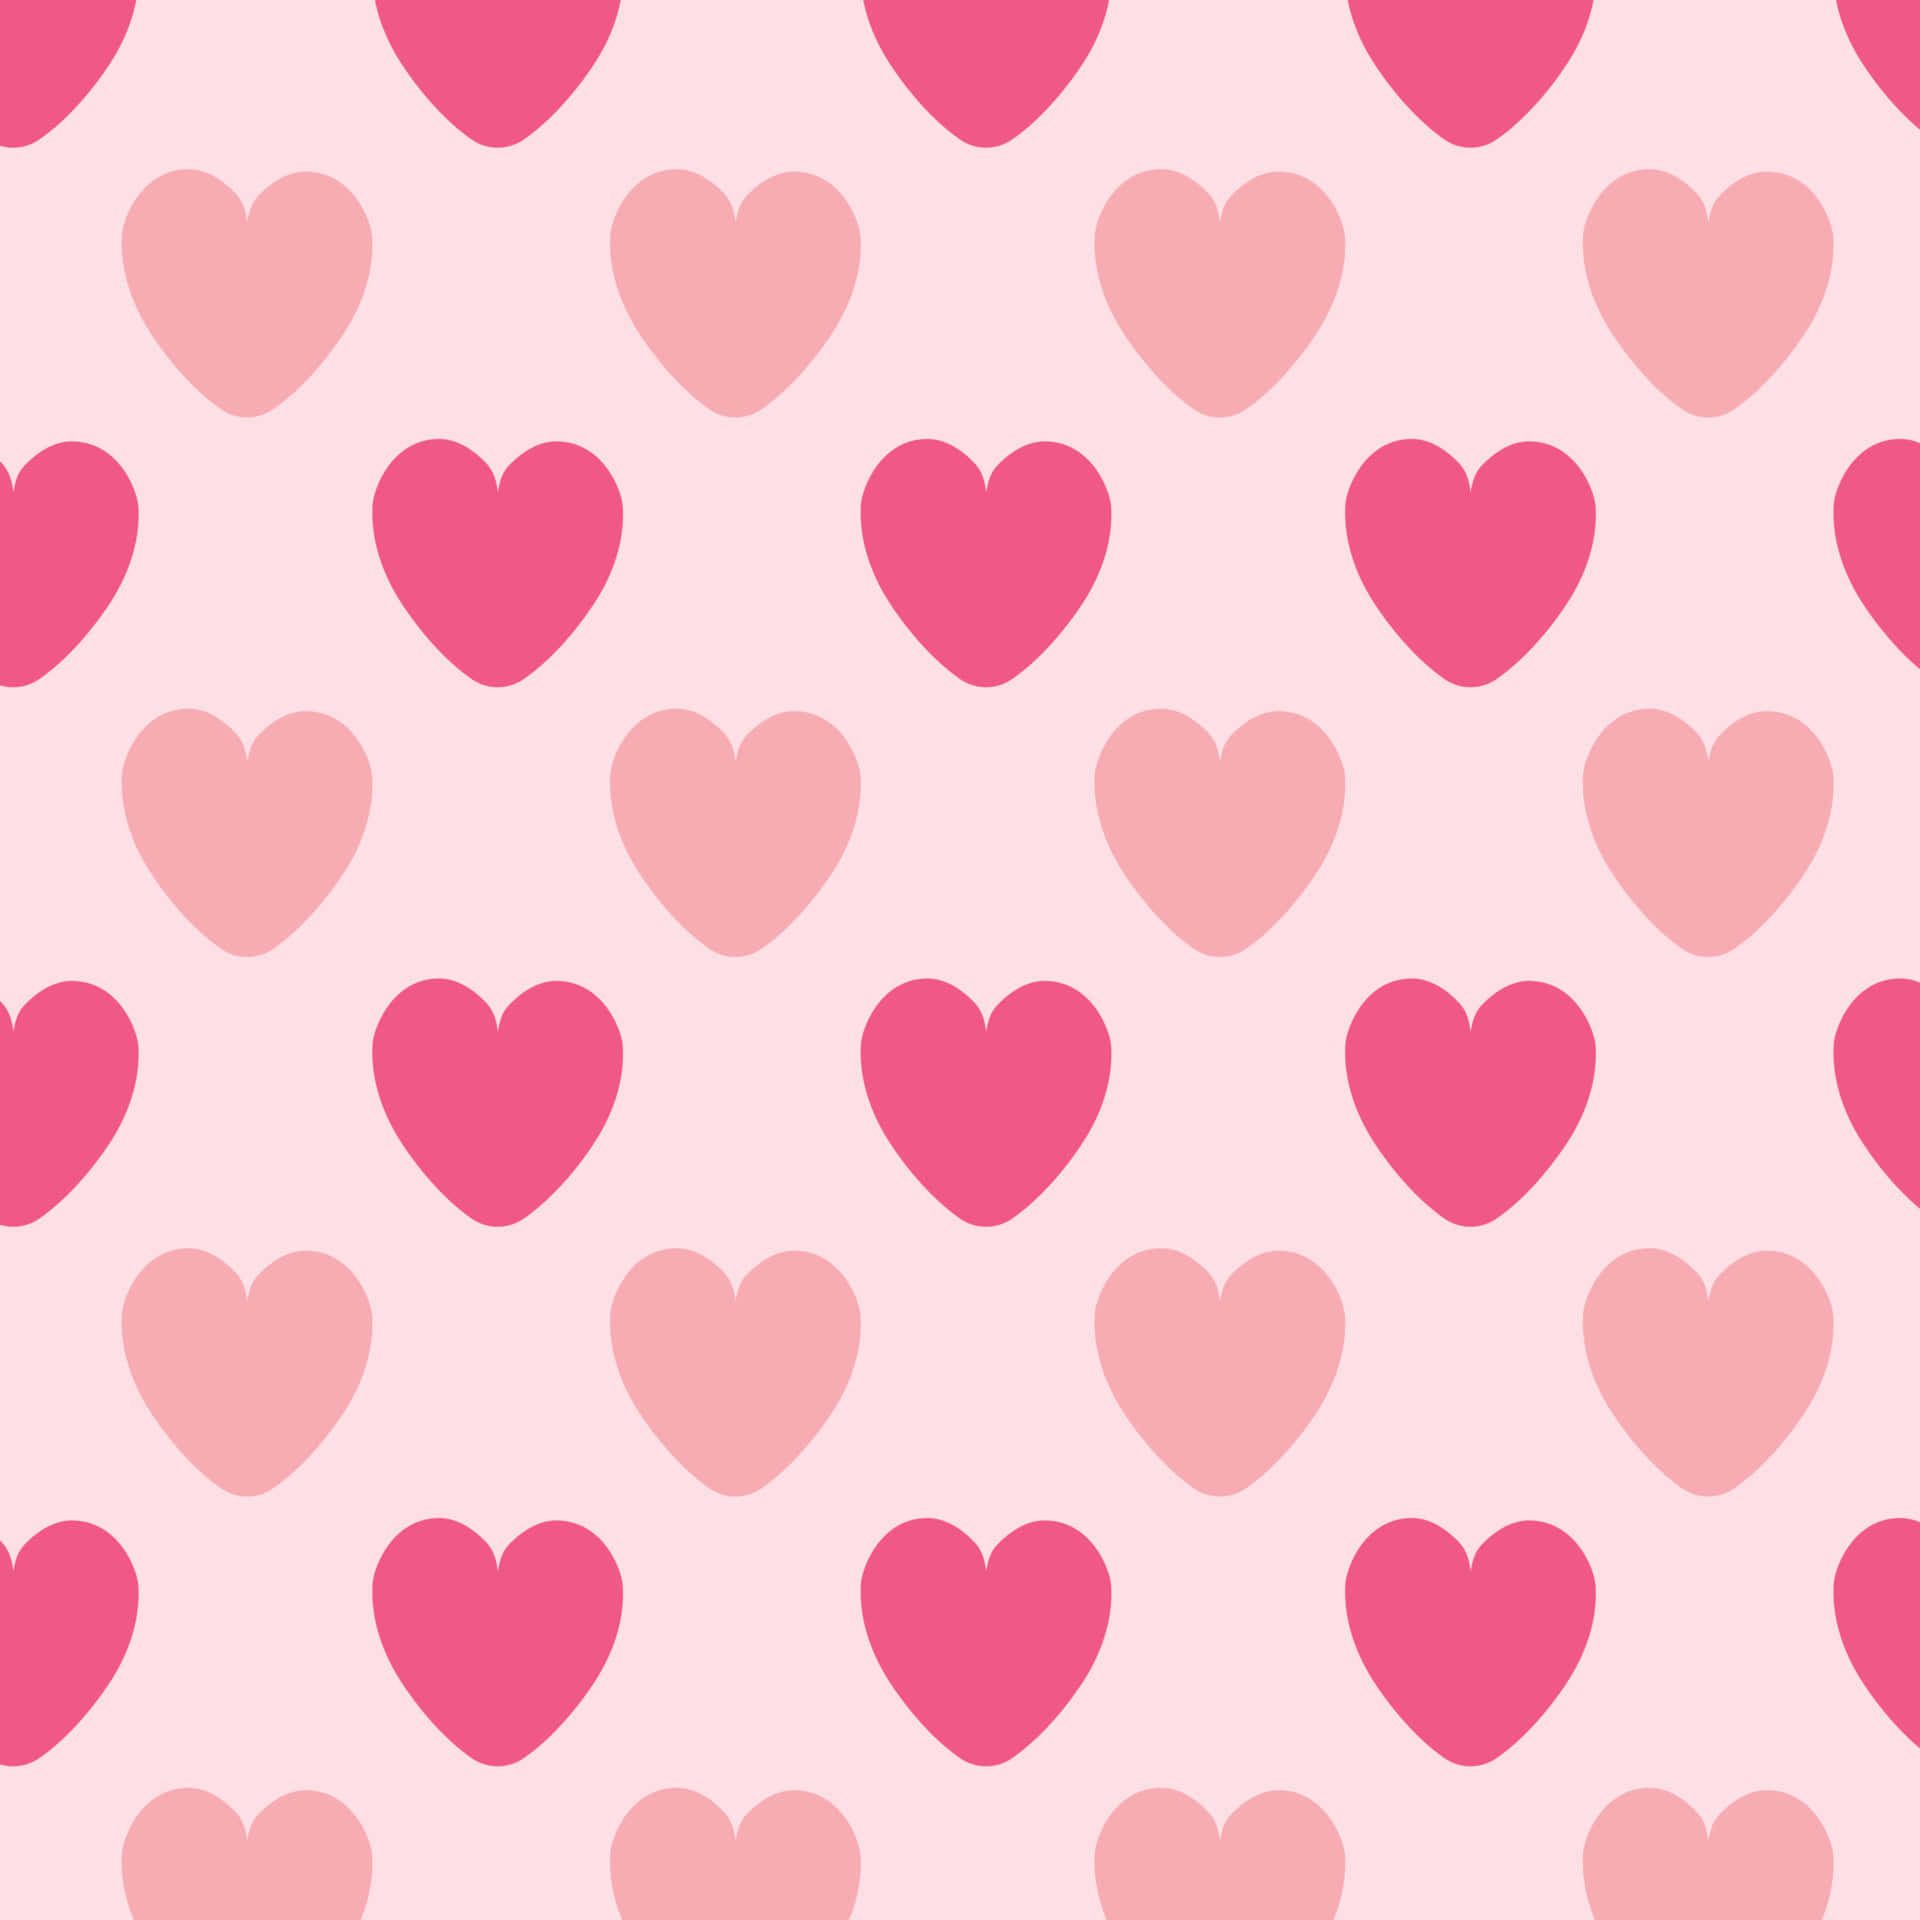 Light And Hot Pink Hearts Background